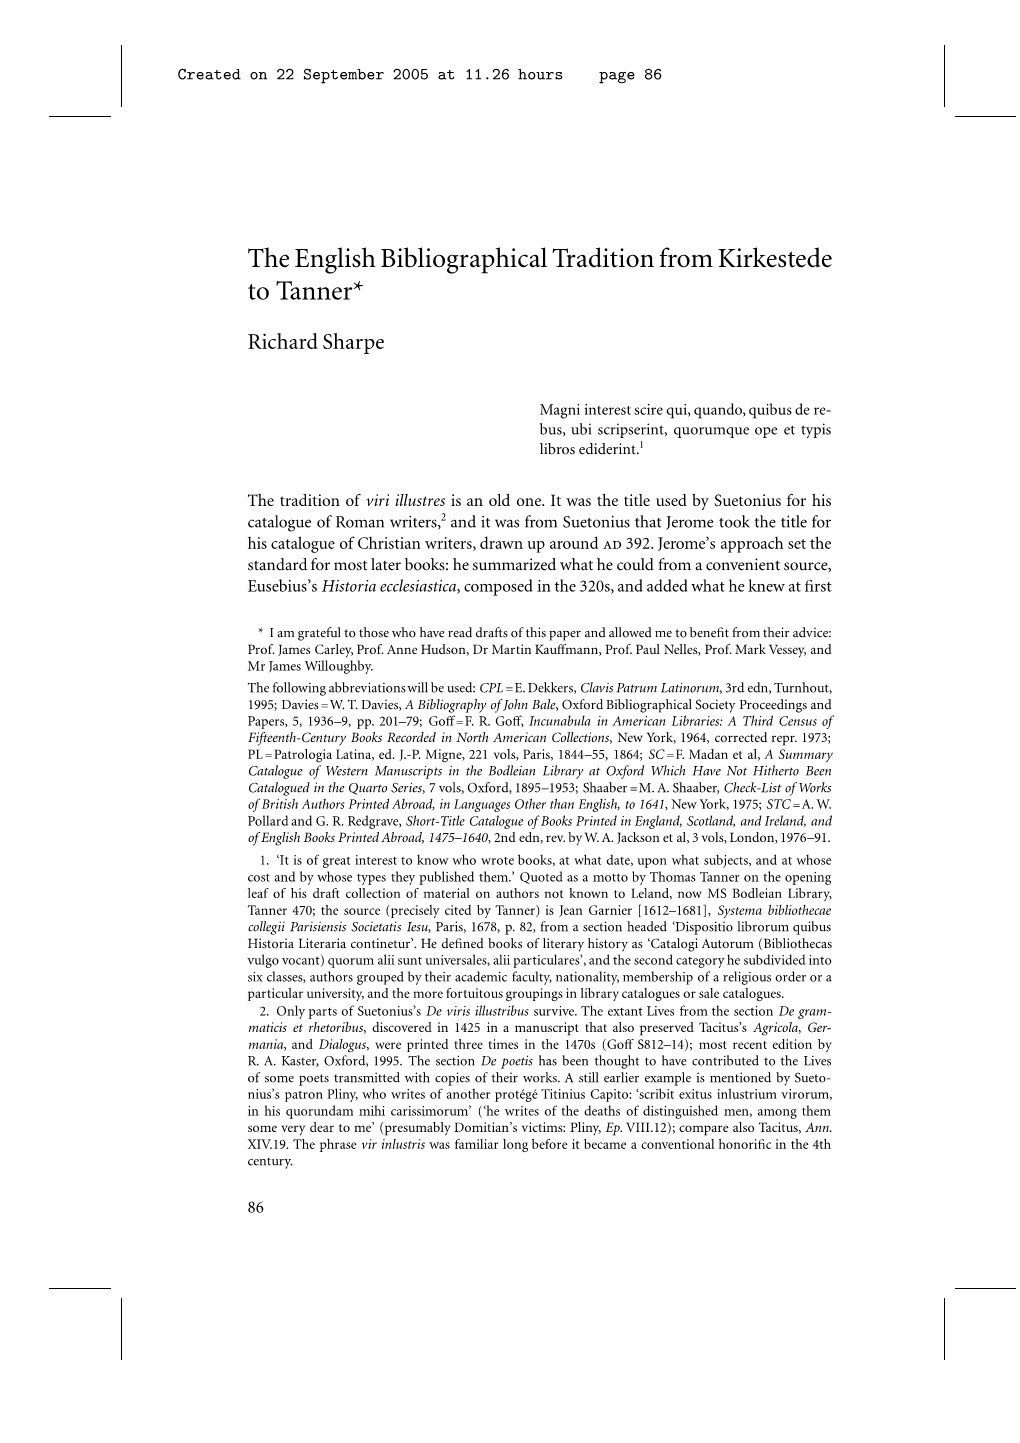 The English Bibliographical Tradition from Kirkestede to Tanner*